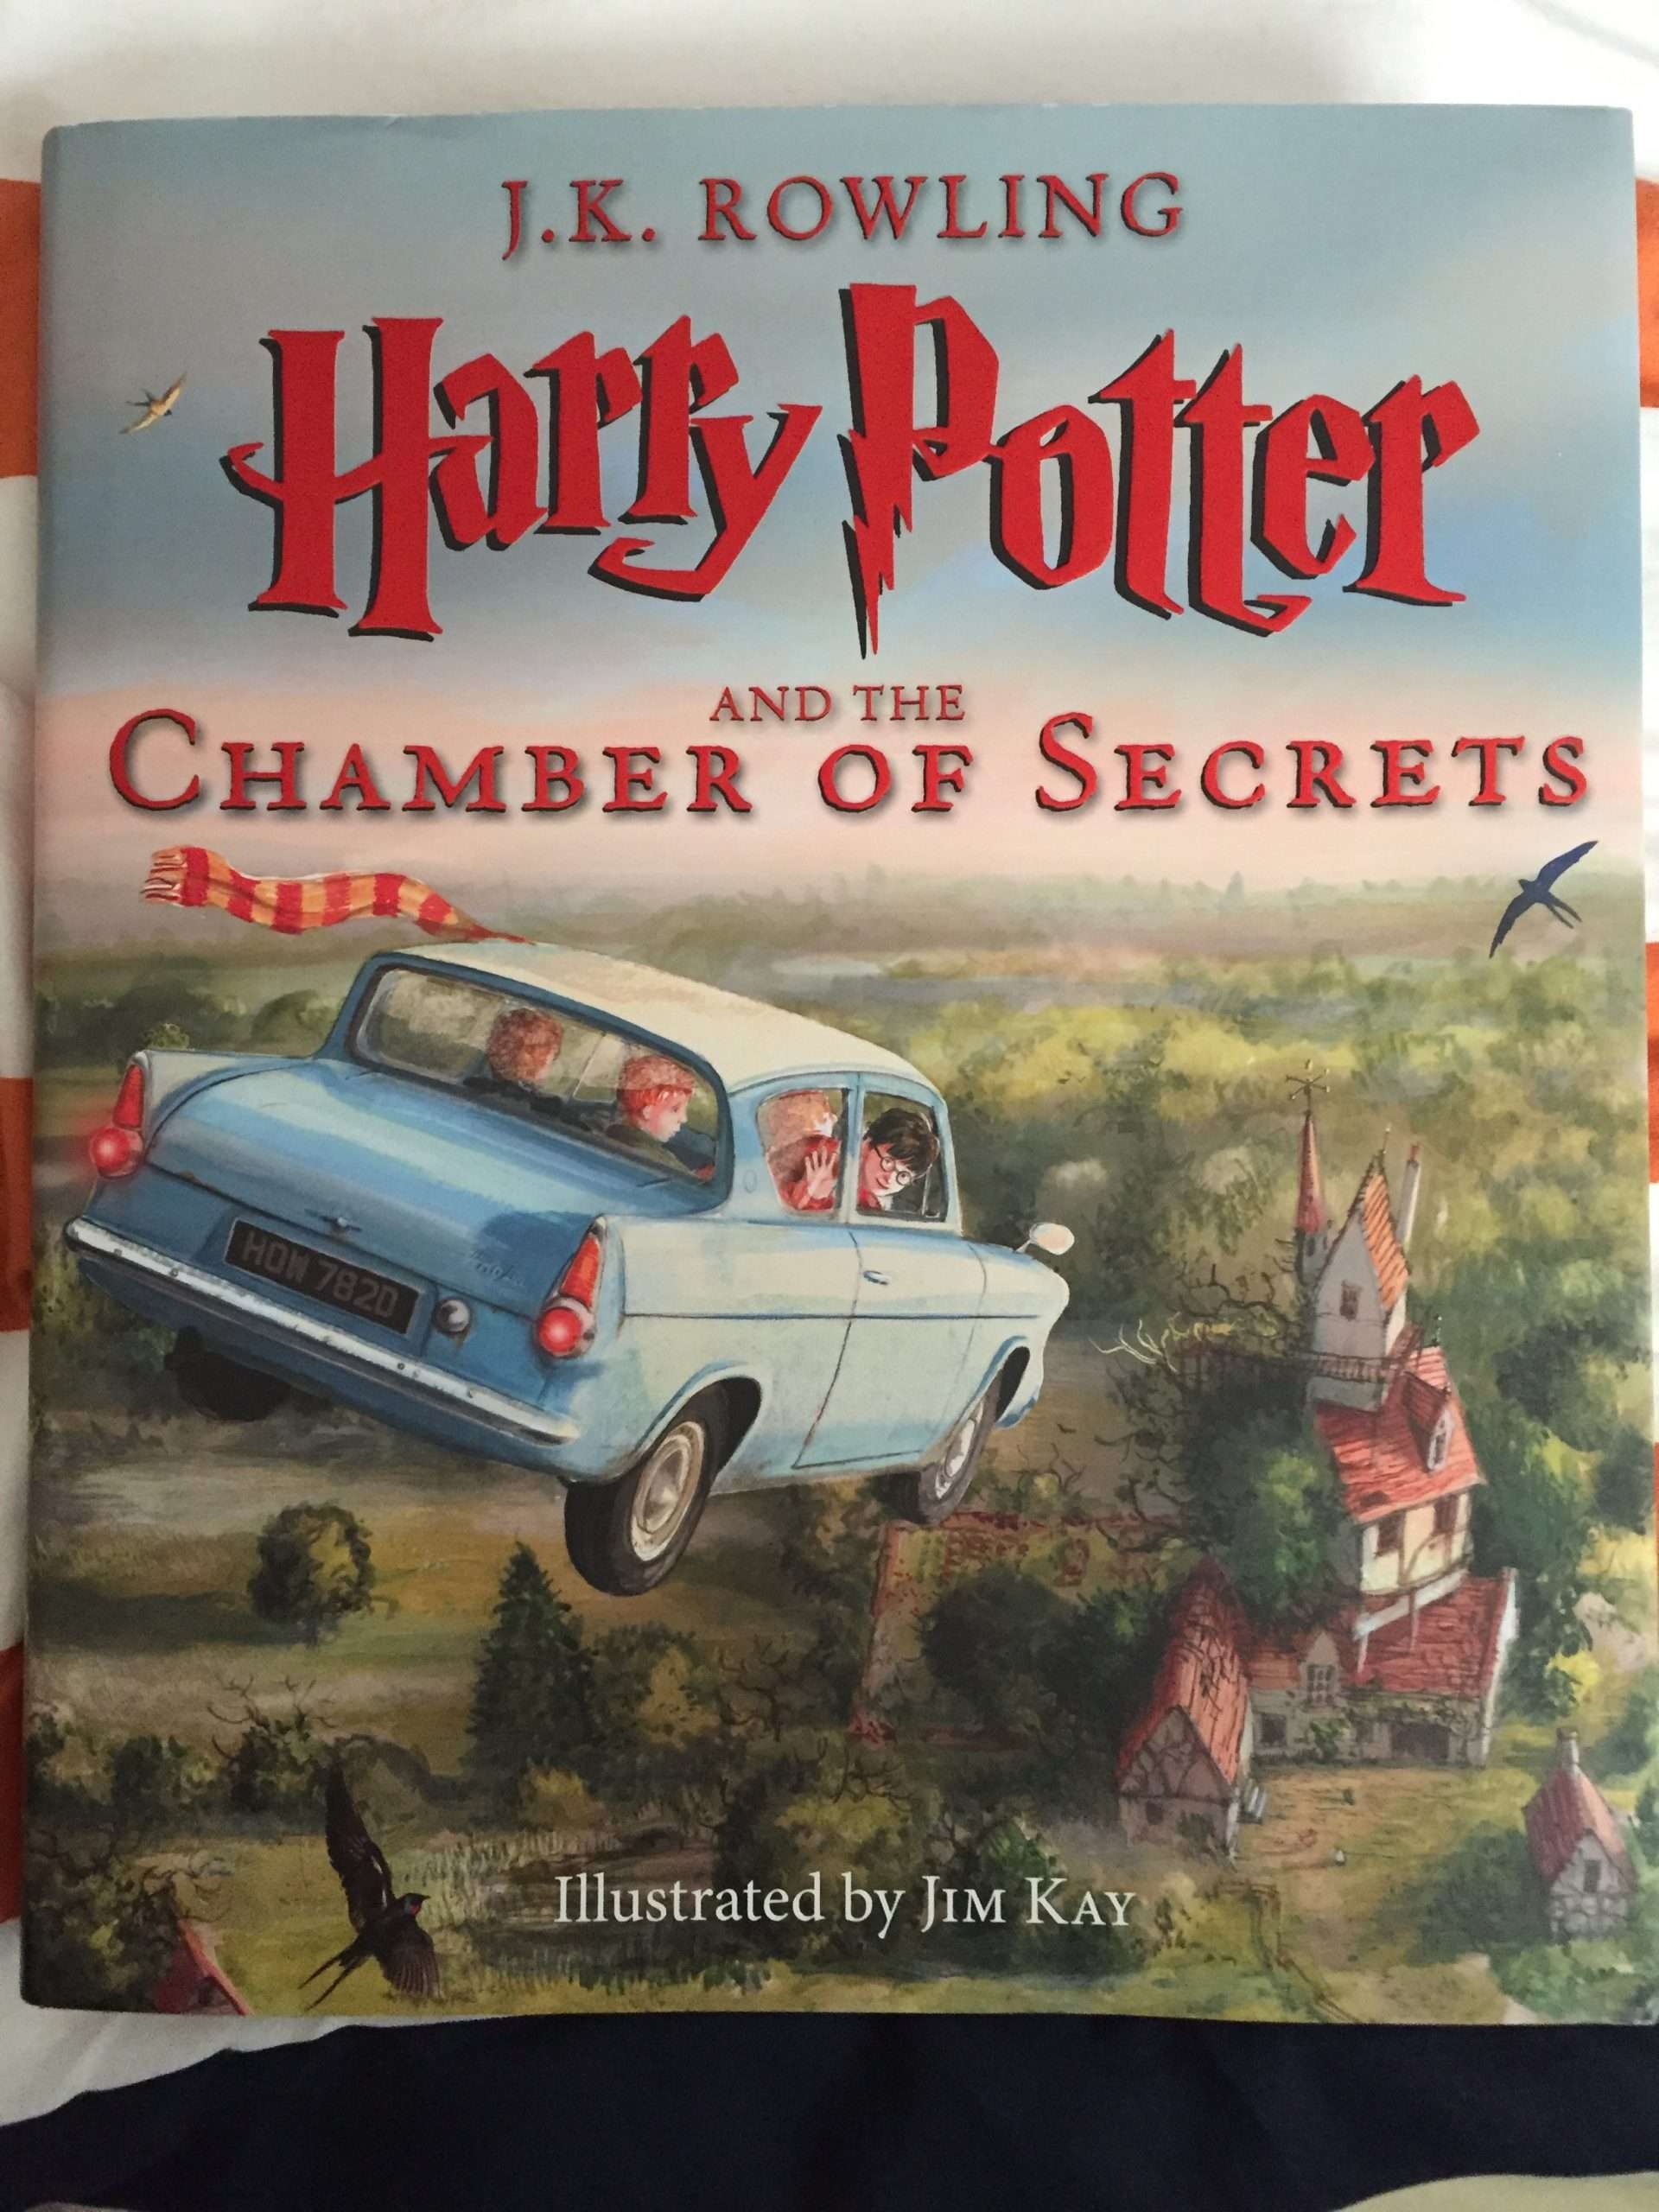 " Chamber of Secrets"  Illustrated Edition Review